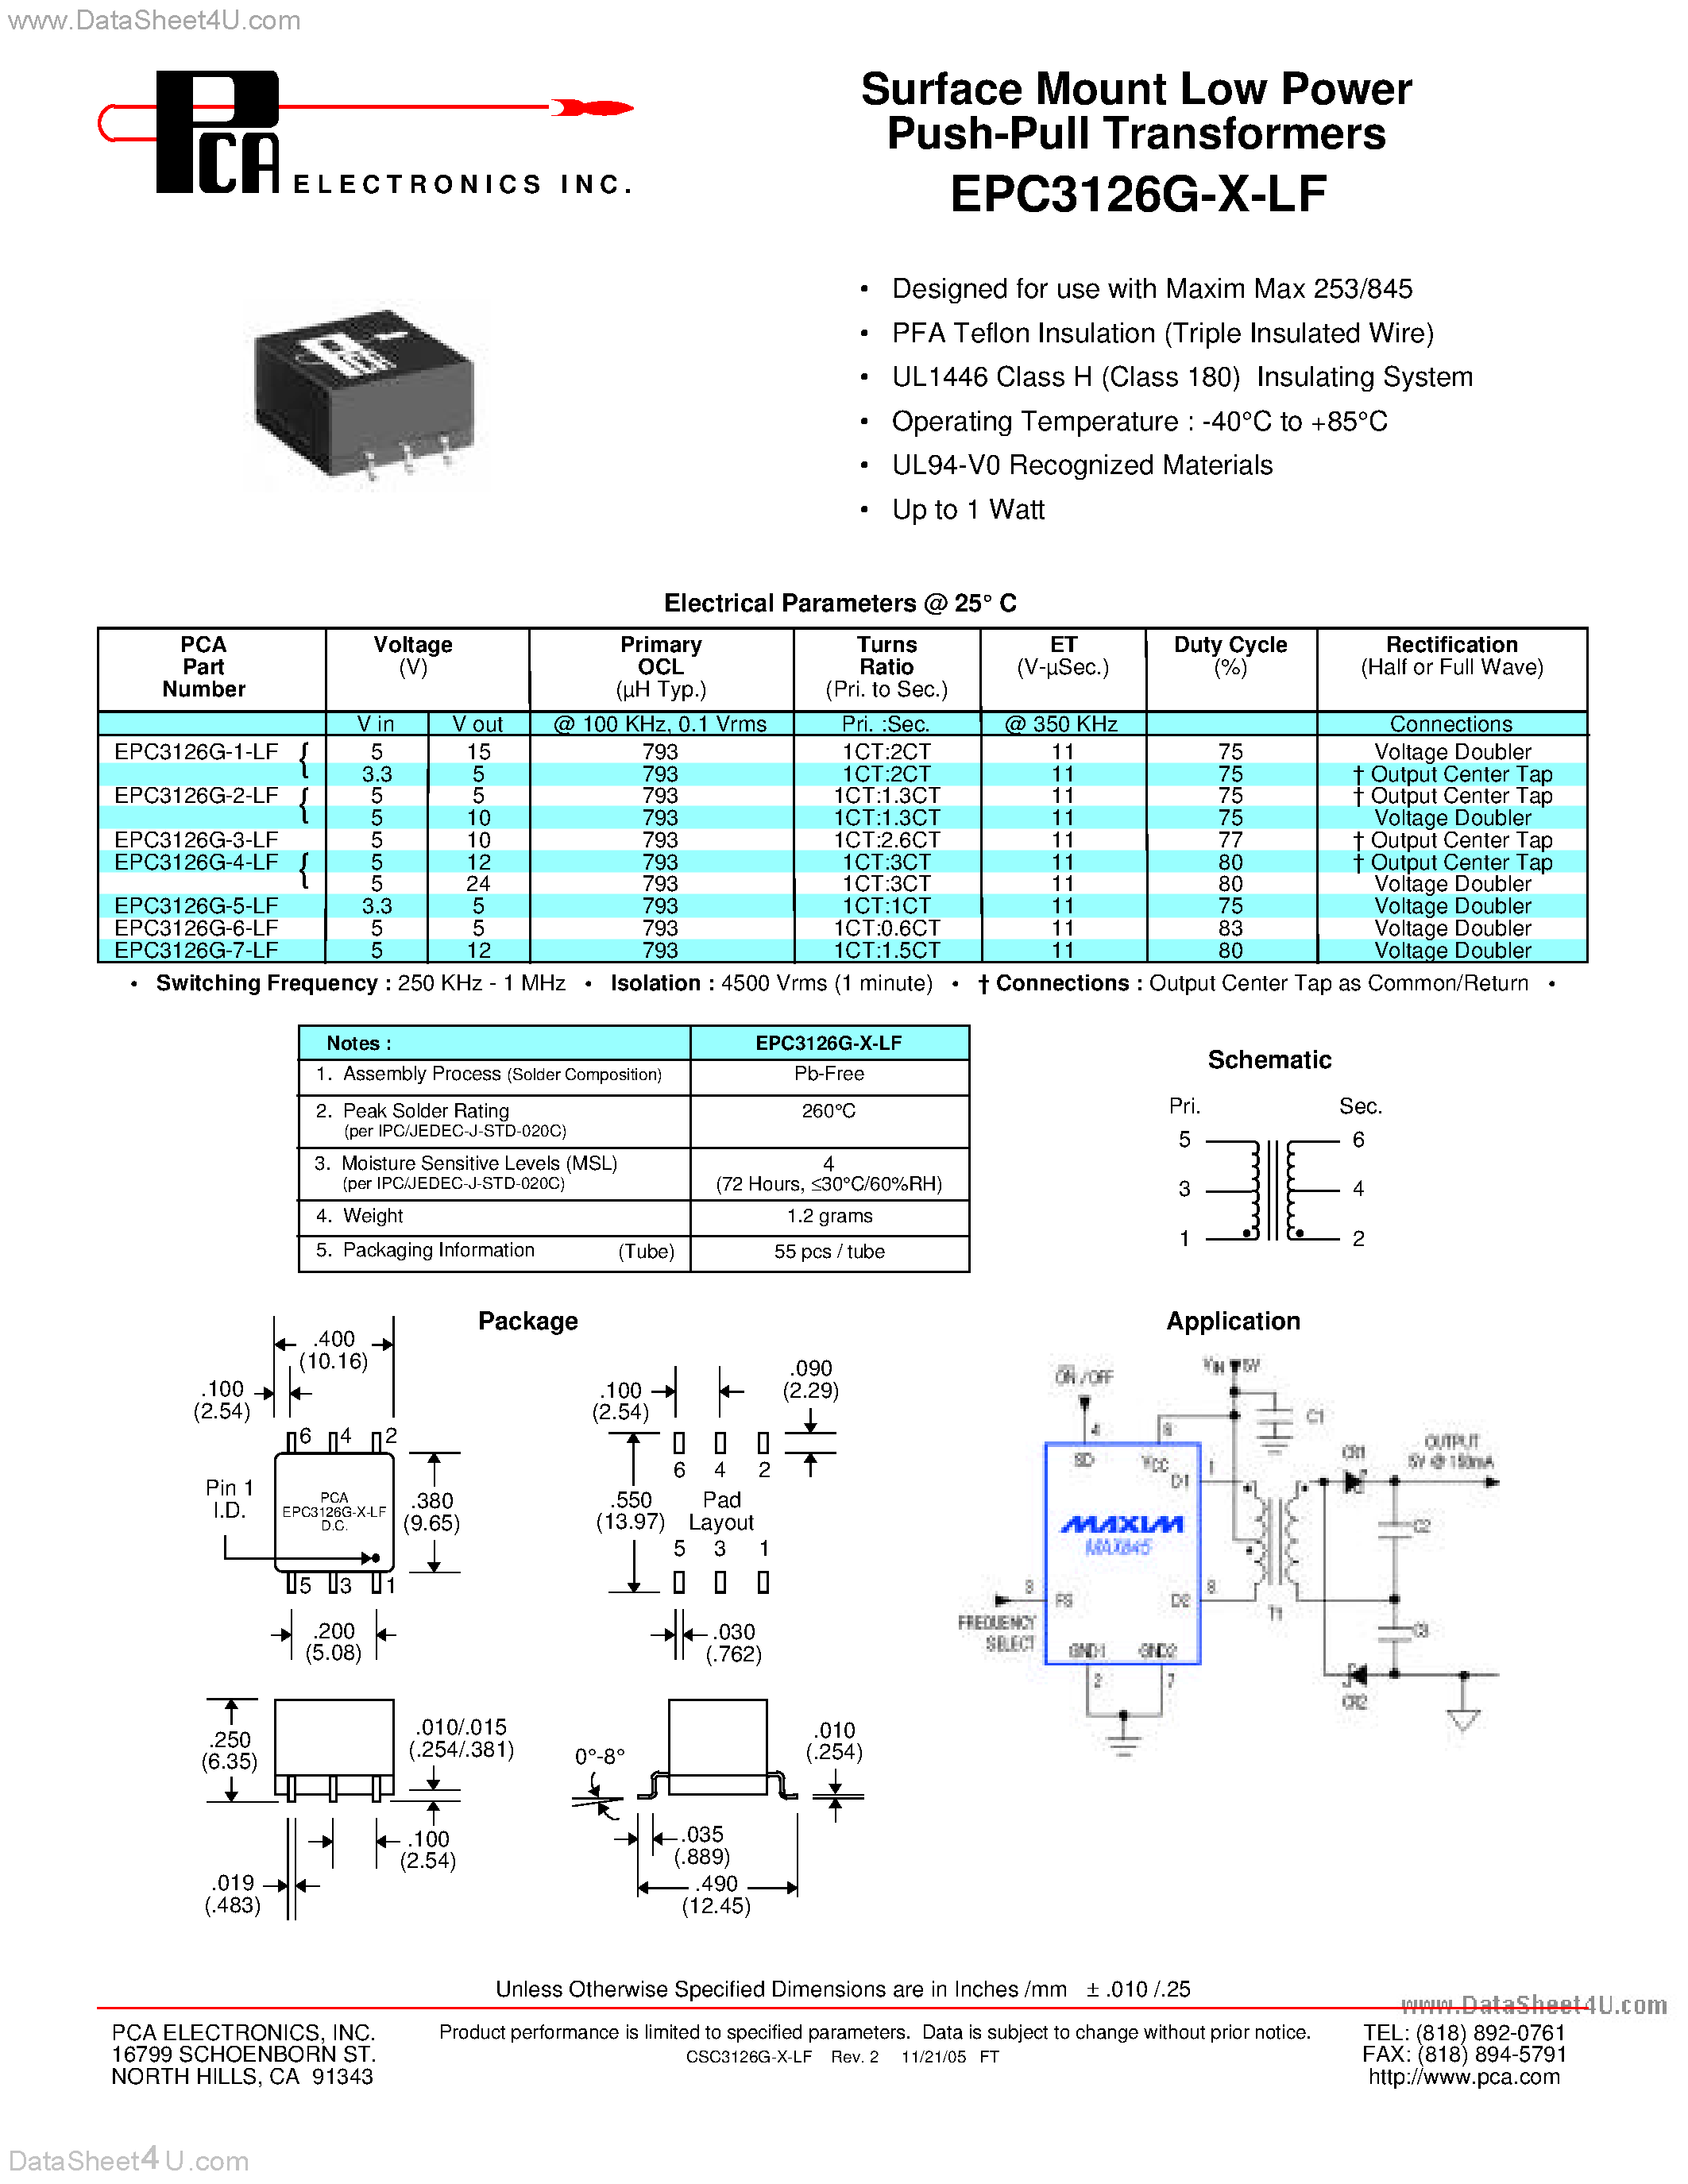 Datasheet EPC3126G-x-LF - Surface Mount Low Power Push-Pull Transformers page 1